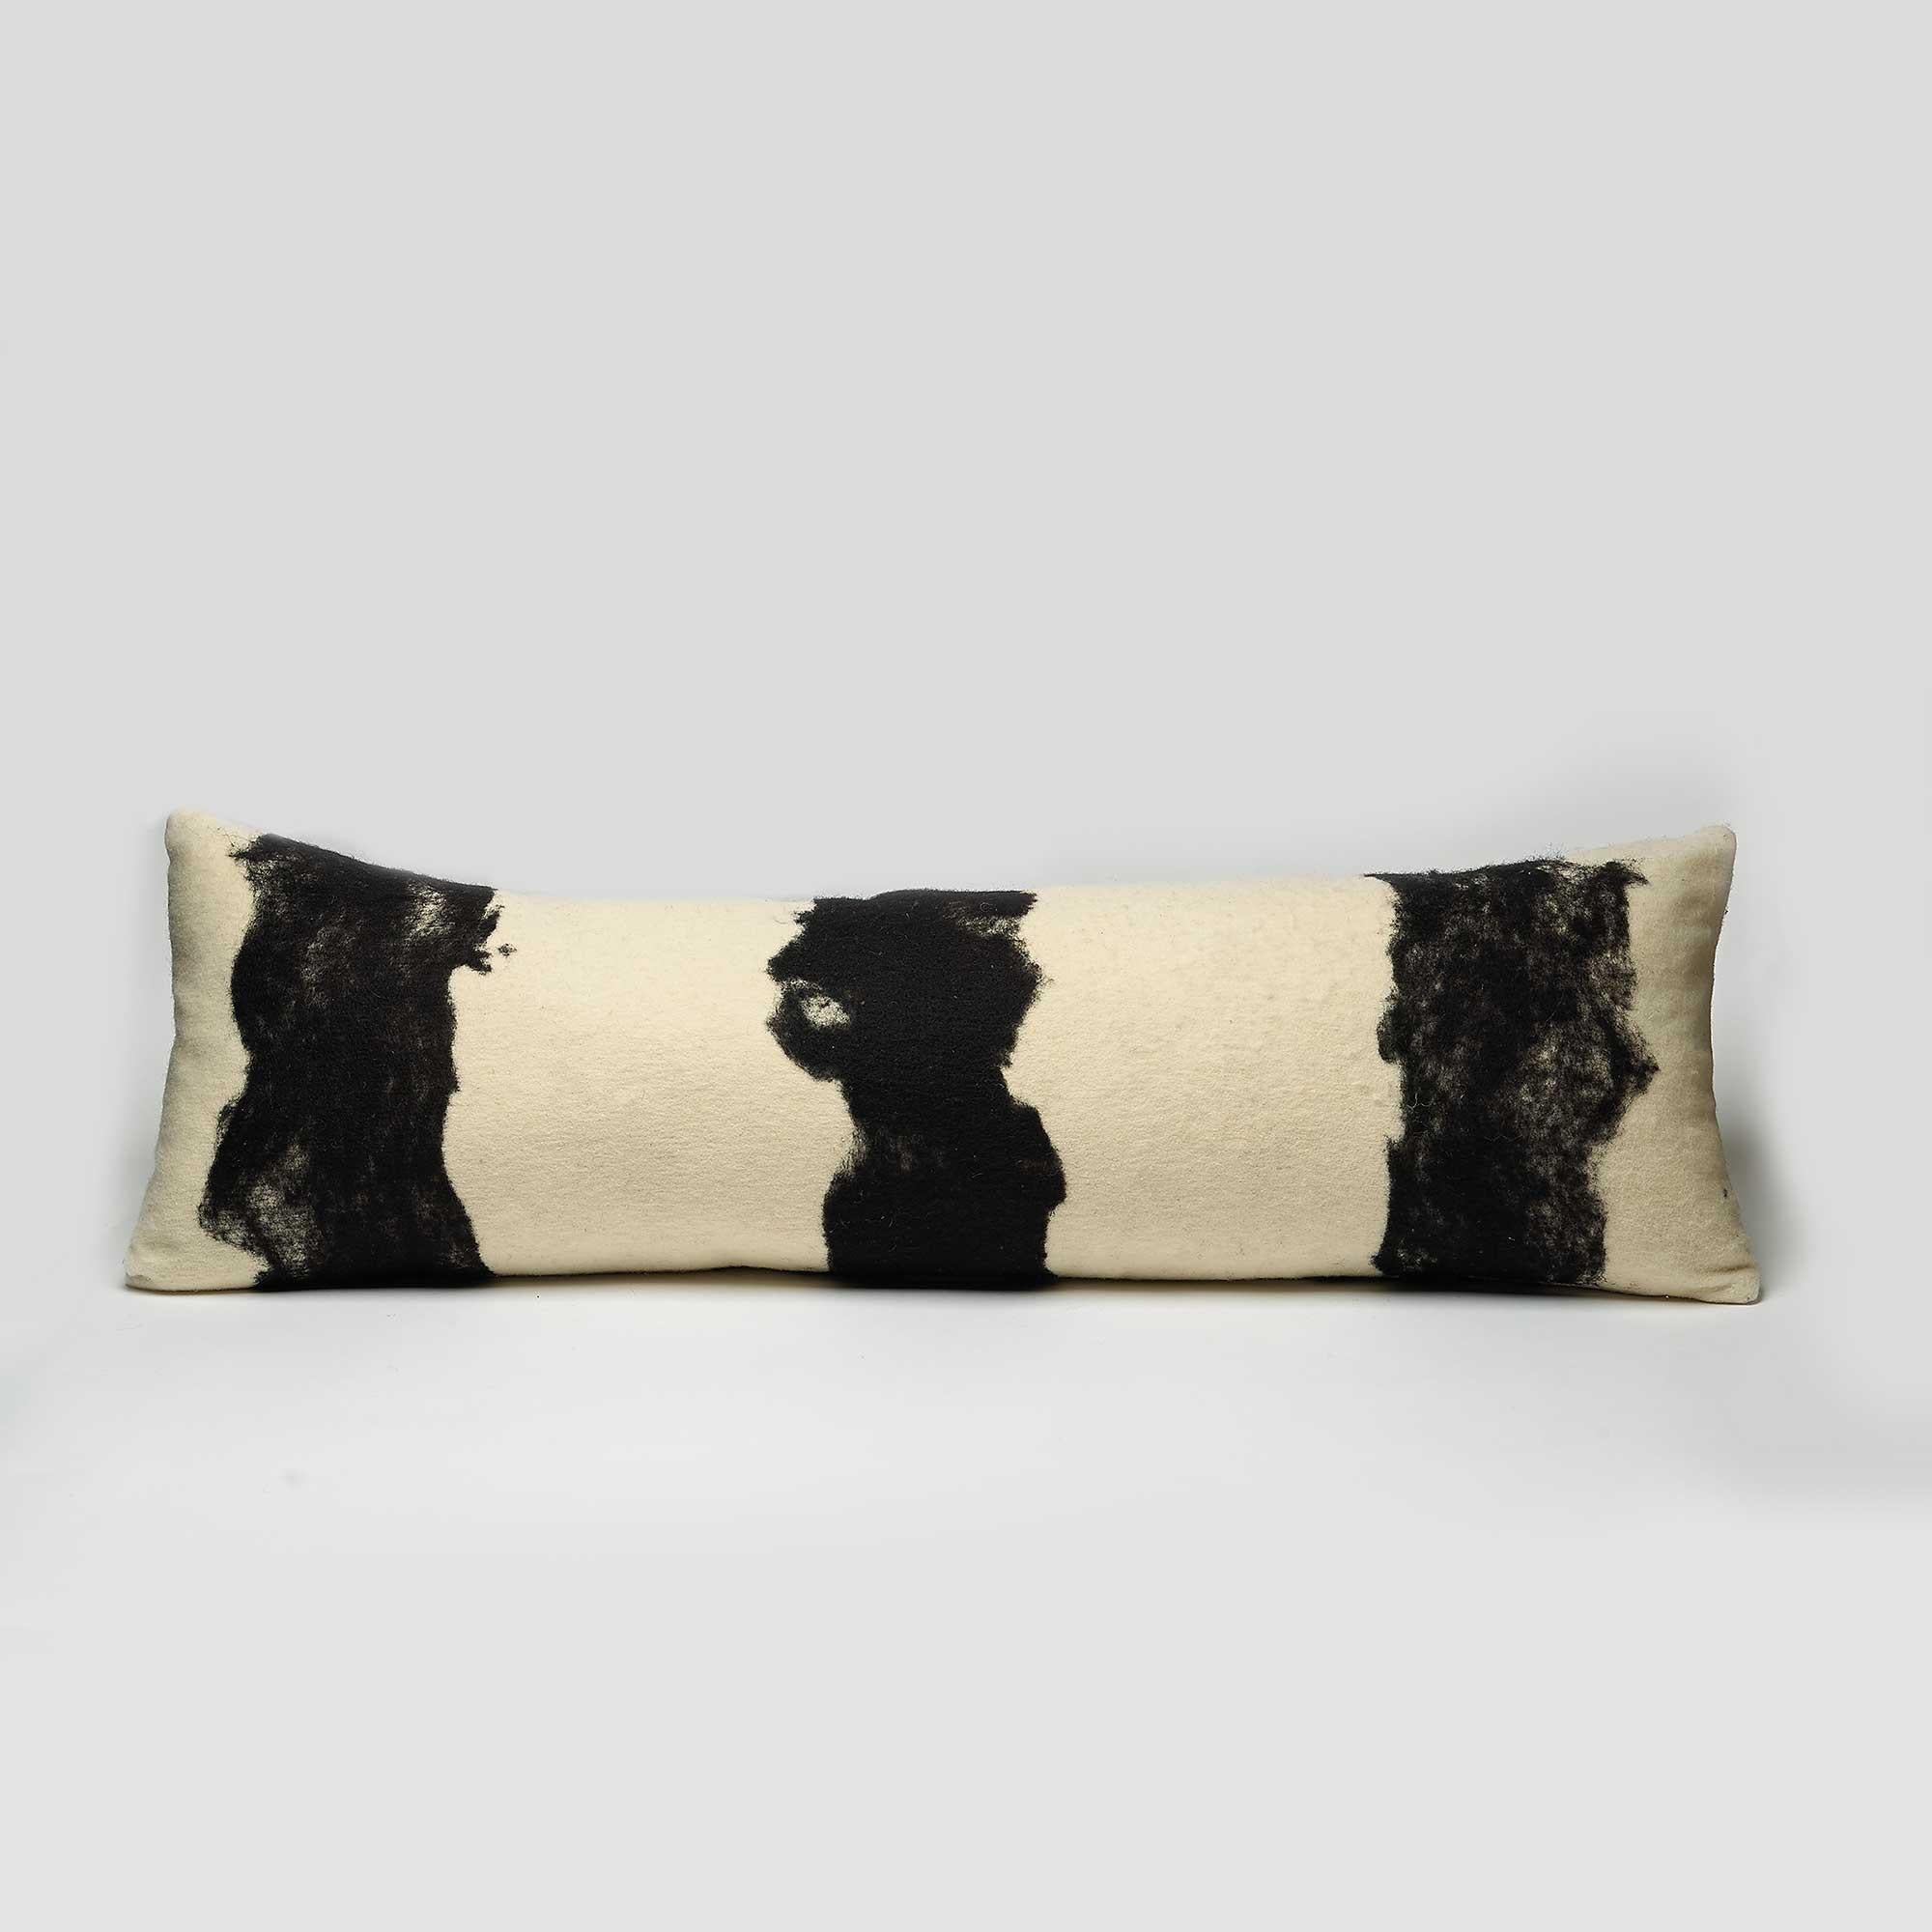 Milled in JG Switzer's design workshop, this pillow is from our Heritage Sheep Collection. Abstract black design is 